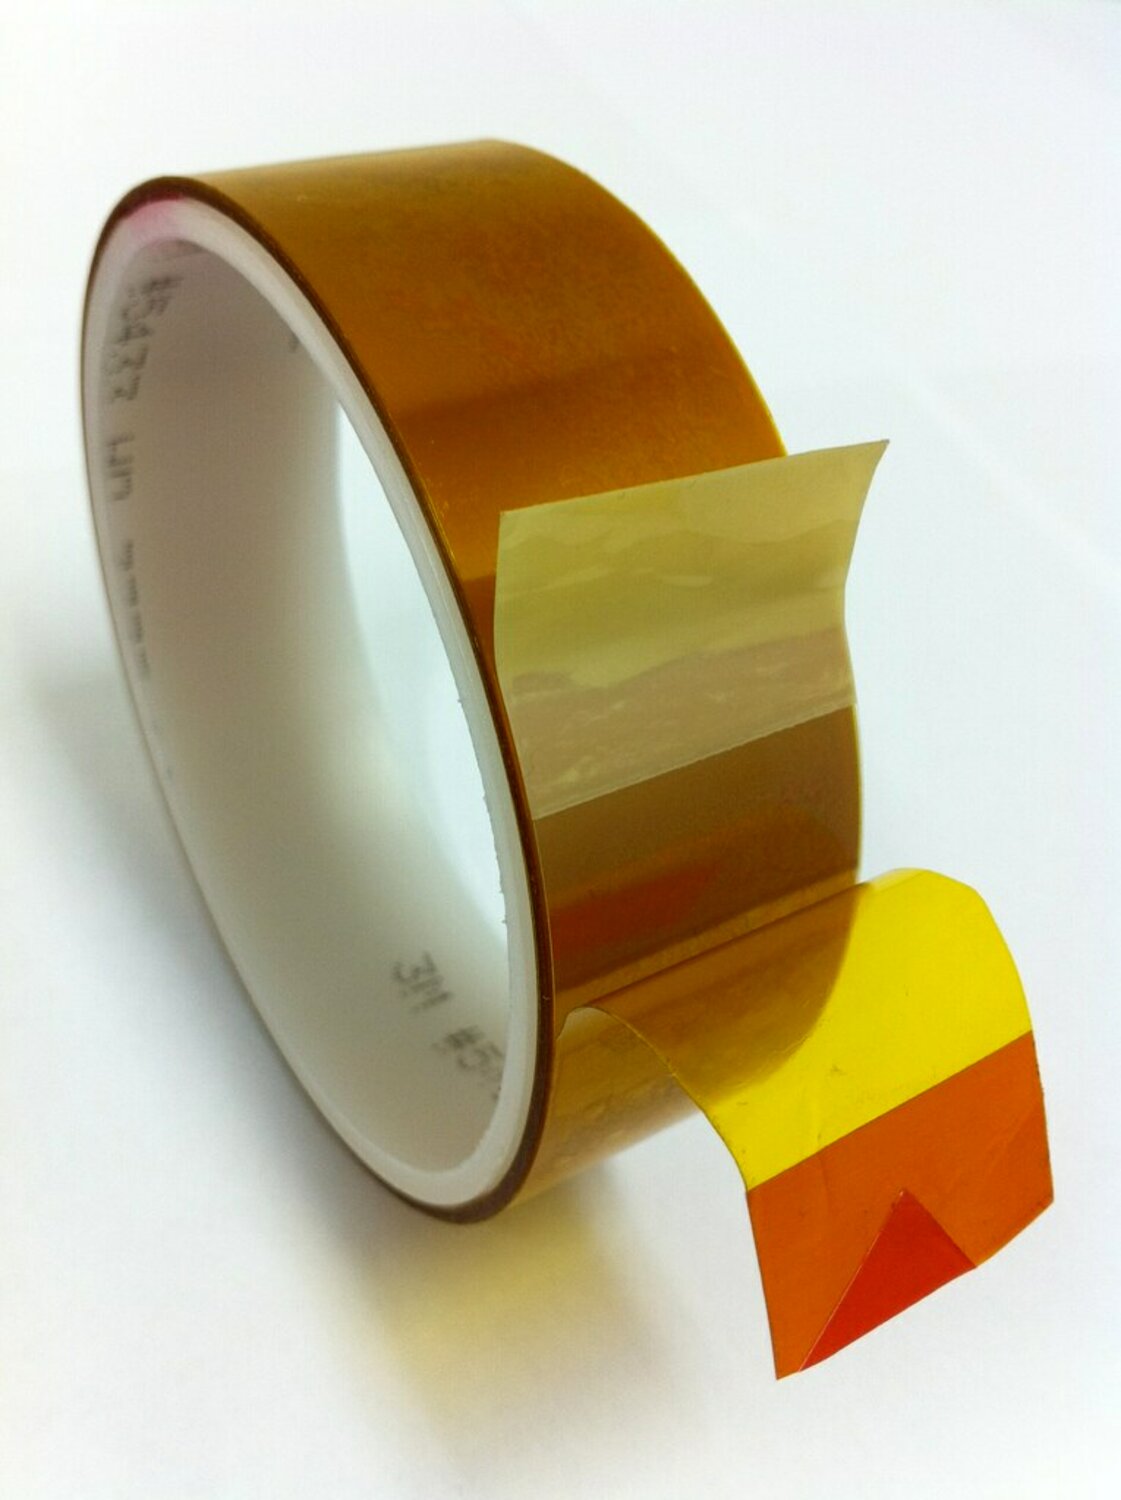 7010334422 - 3M Linered Low-Static Polyimide Film Tape 5433 Amber, 4 in x 36 yds x
2.7 mil, 3/Case, Bulk